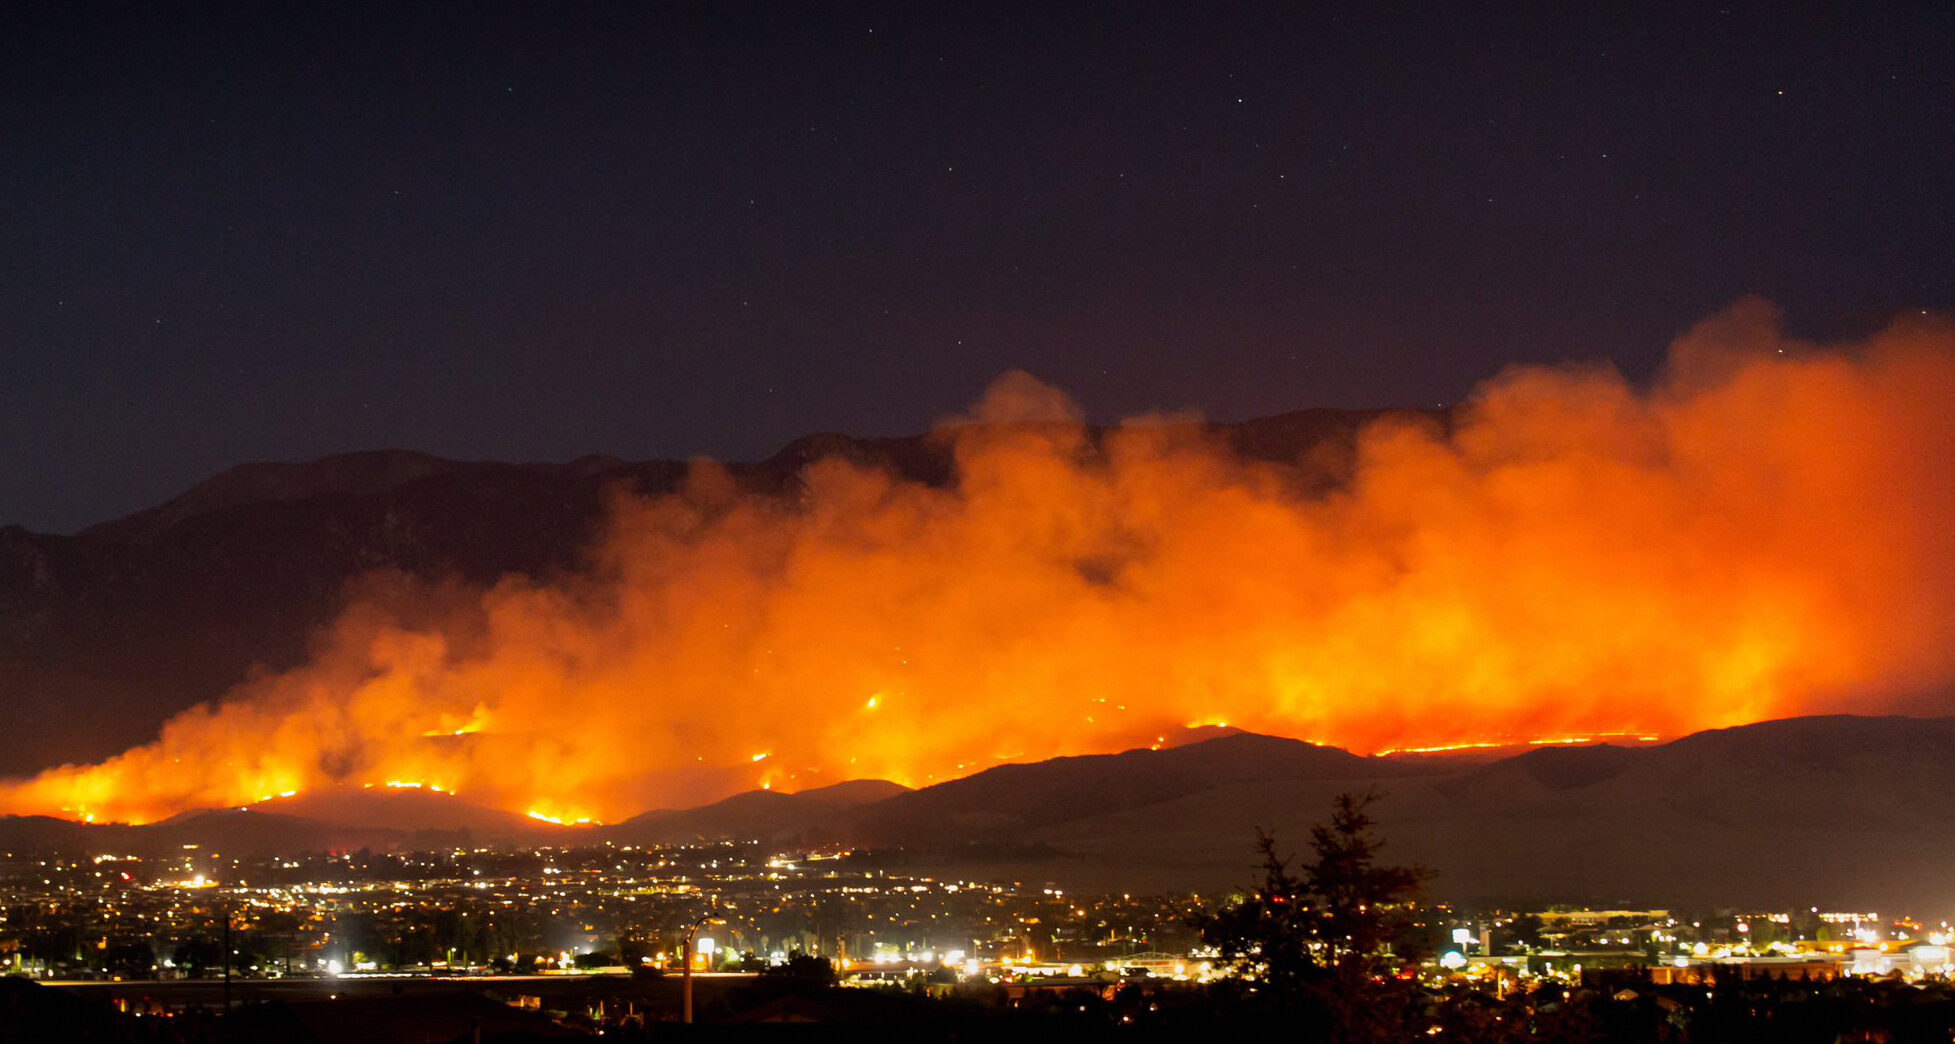 Climate alarmism will intensify in California during this wildfire season.